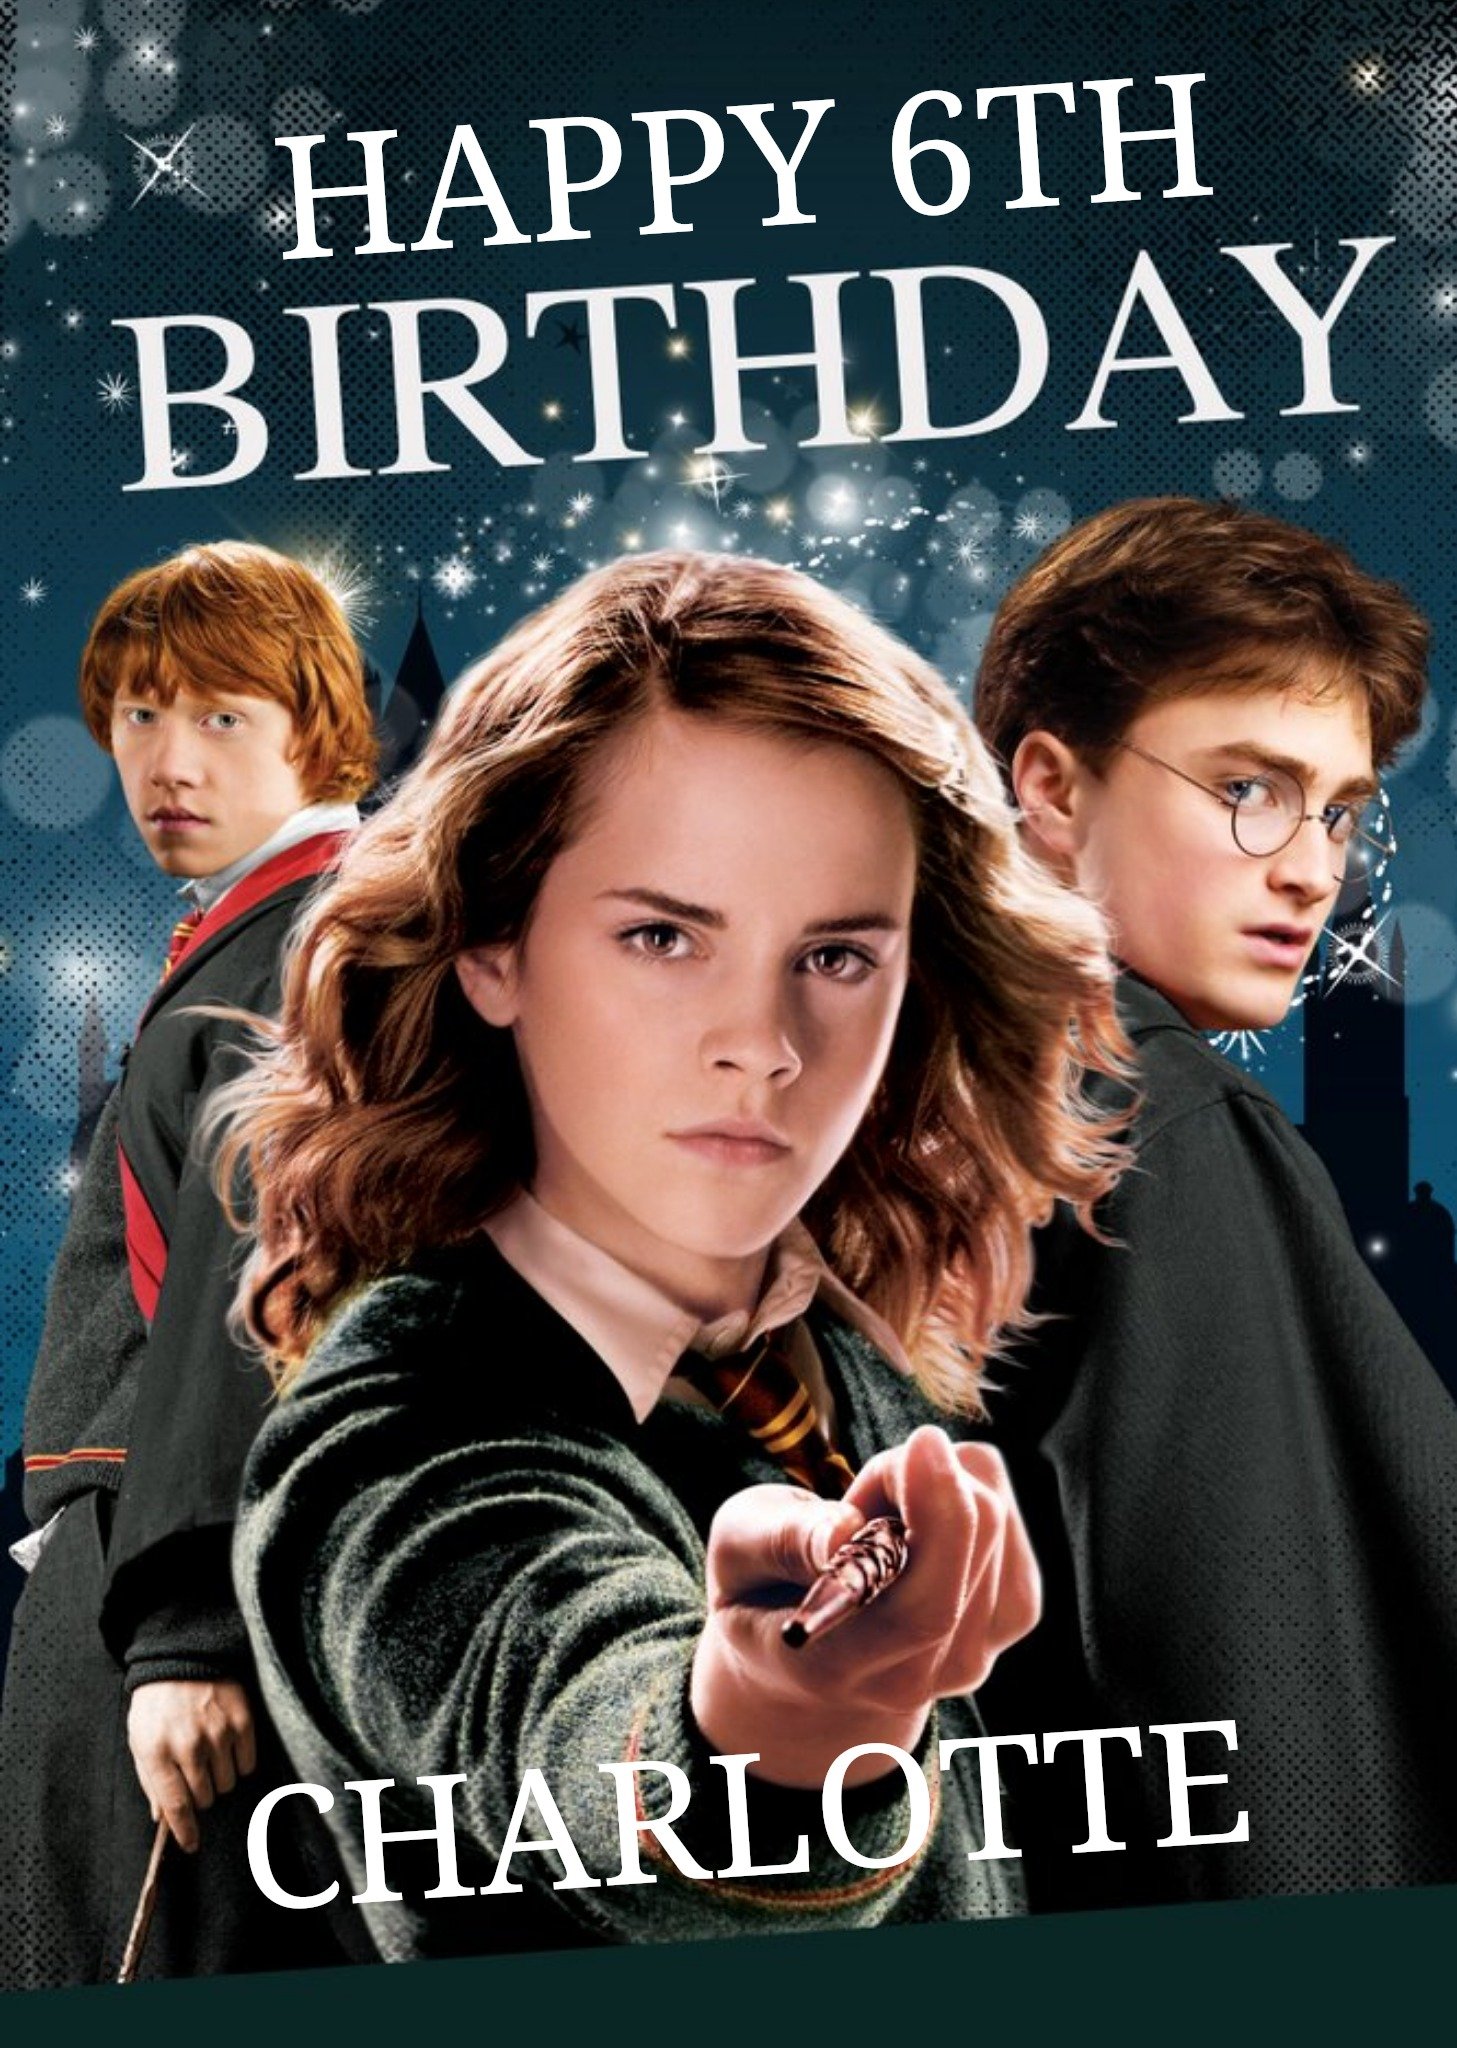 Harry Potter Ron Weasley Hermione Granger Card - Magical 6th Birthday Card, Large